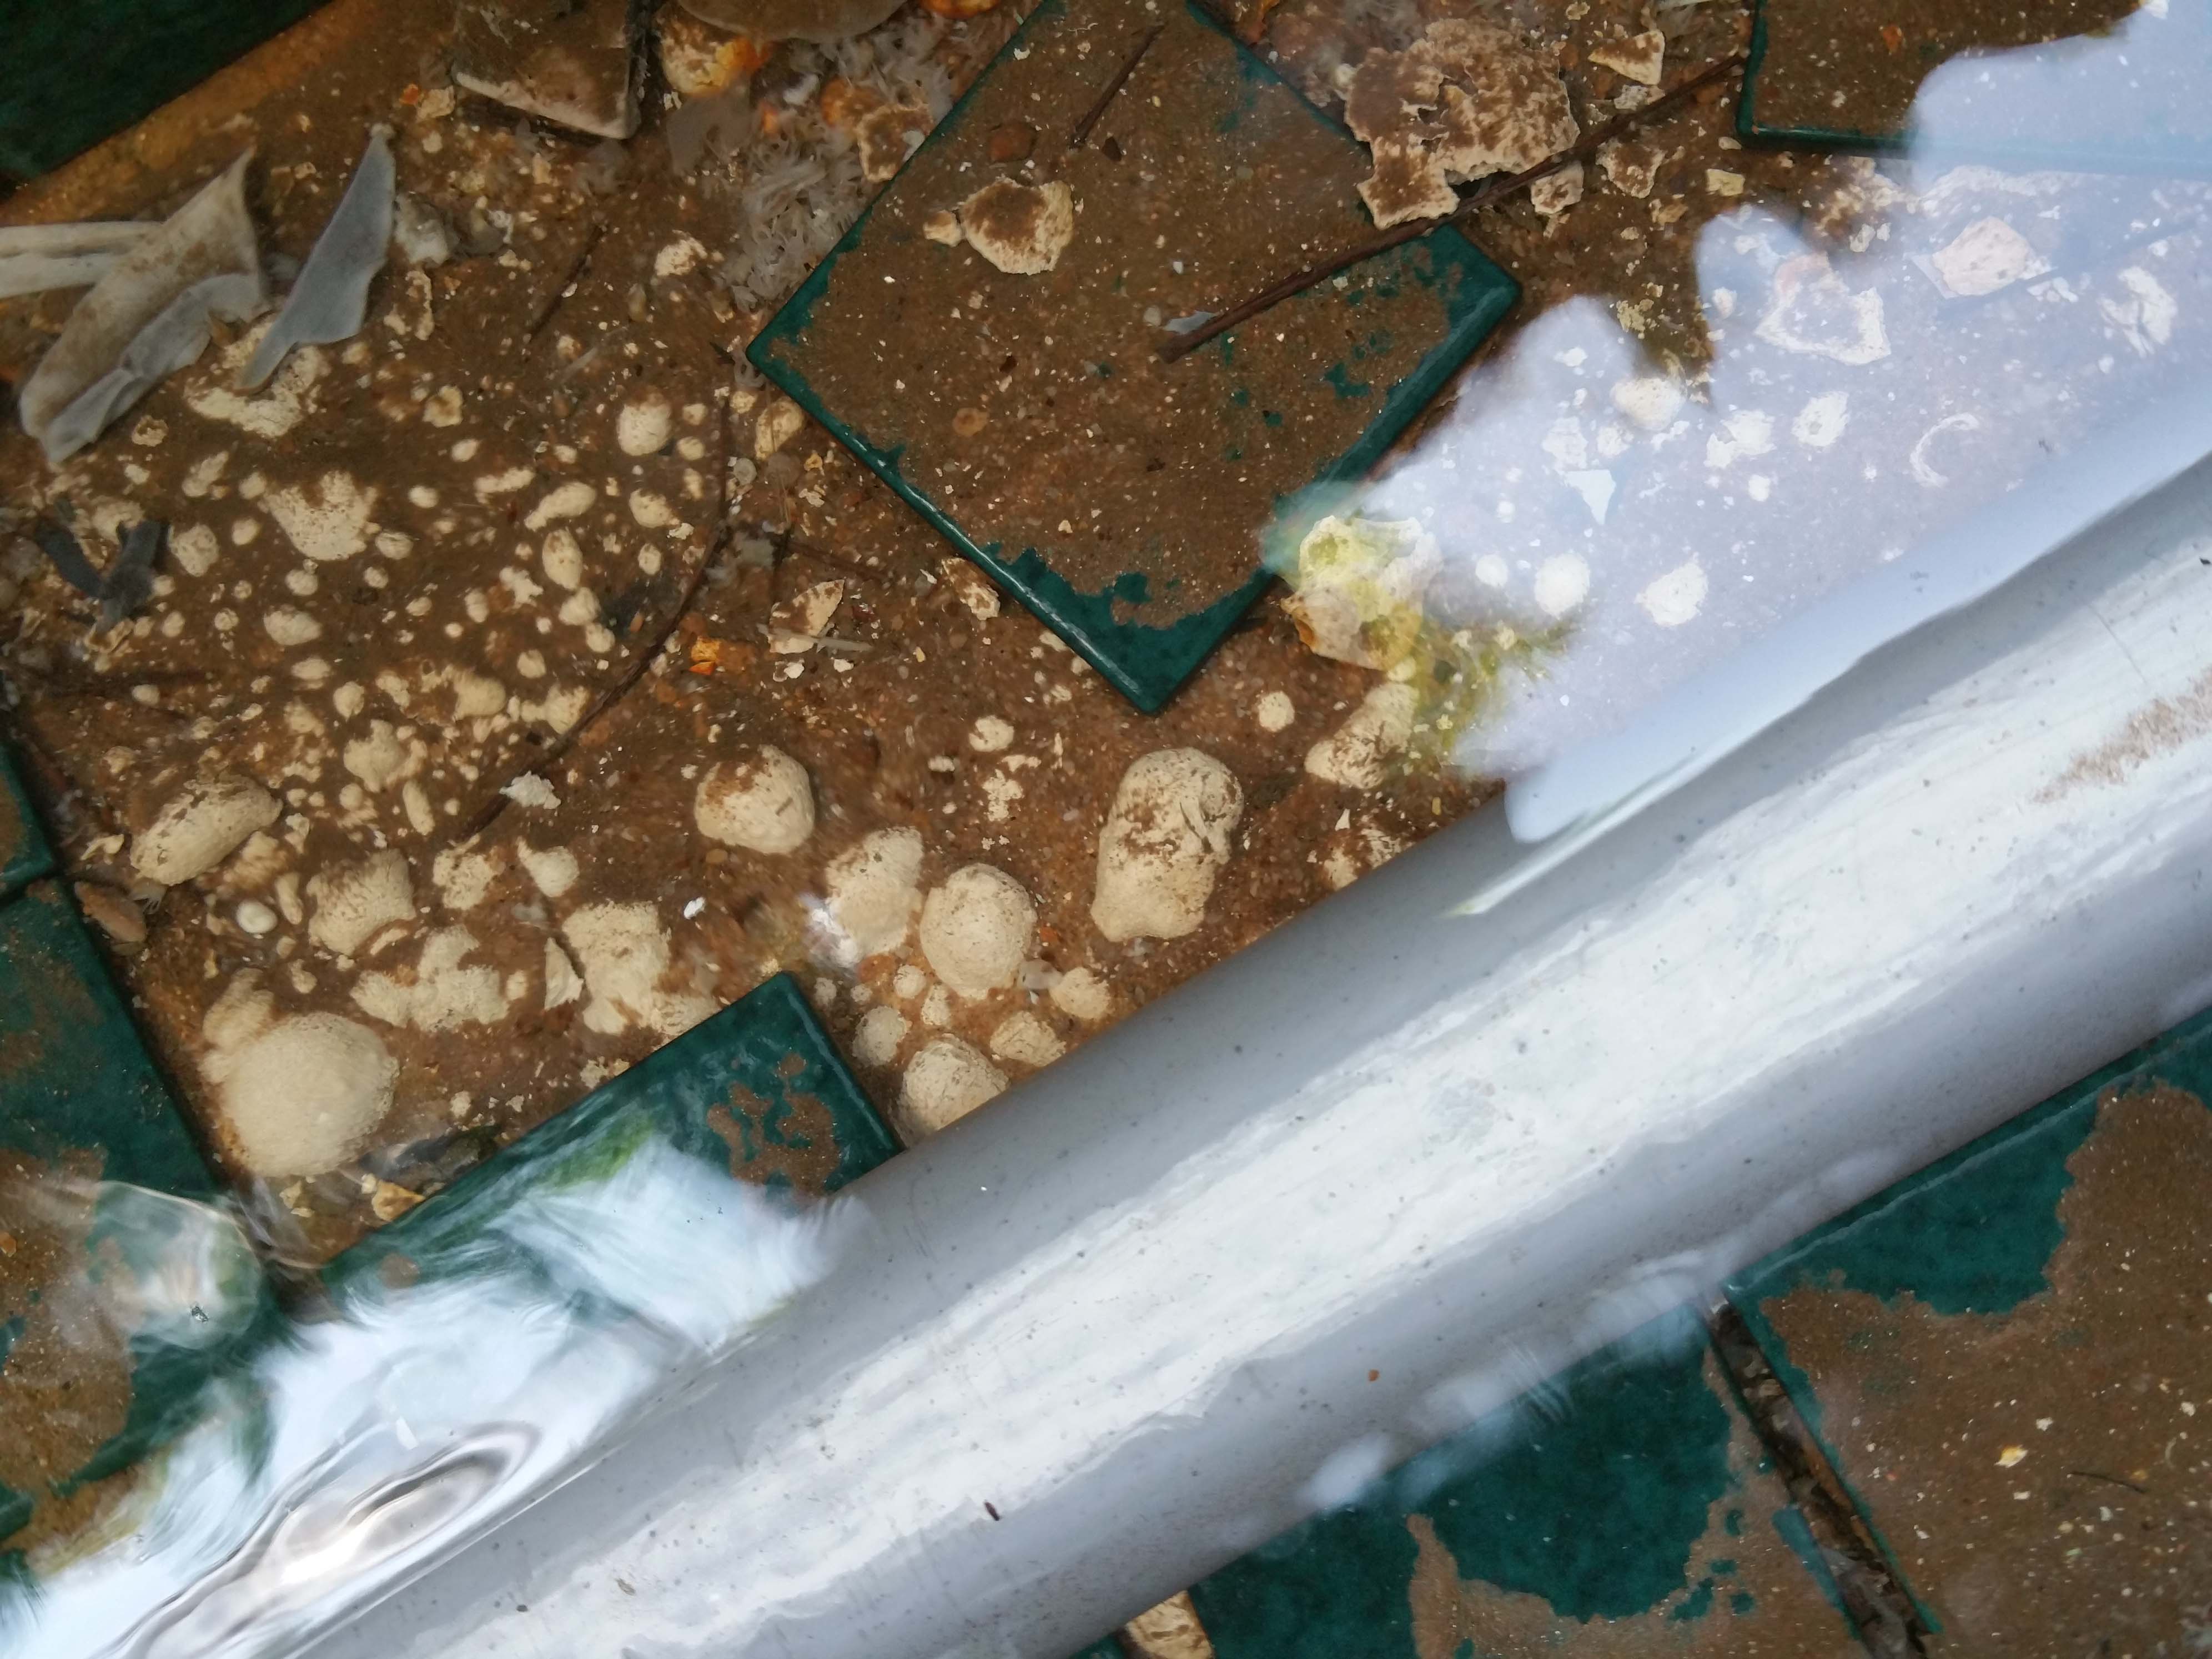 38. condo water feature leak. menbrane(white) bubbled up..jpg